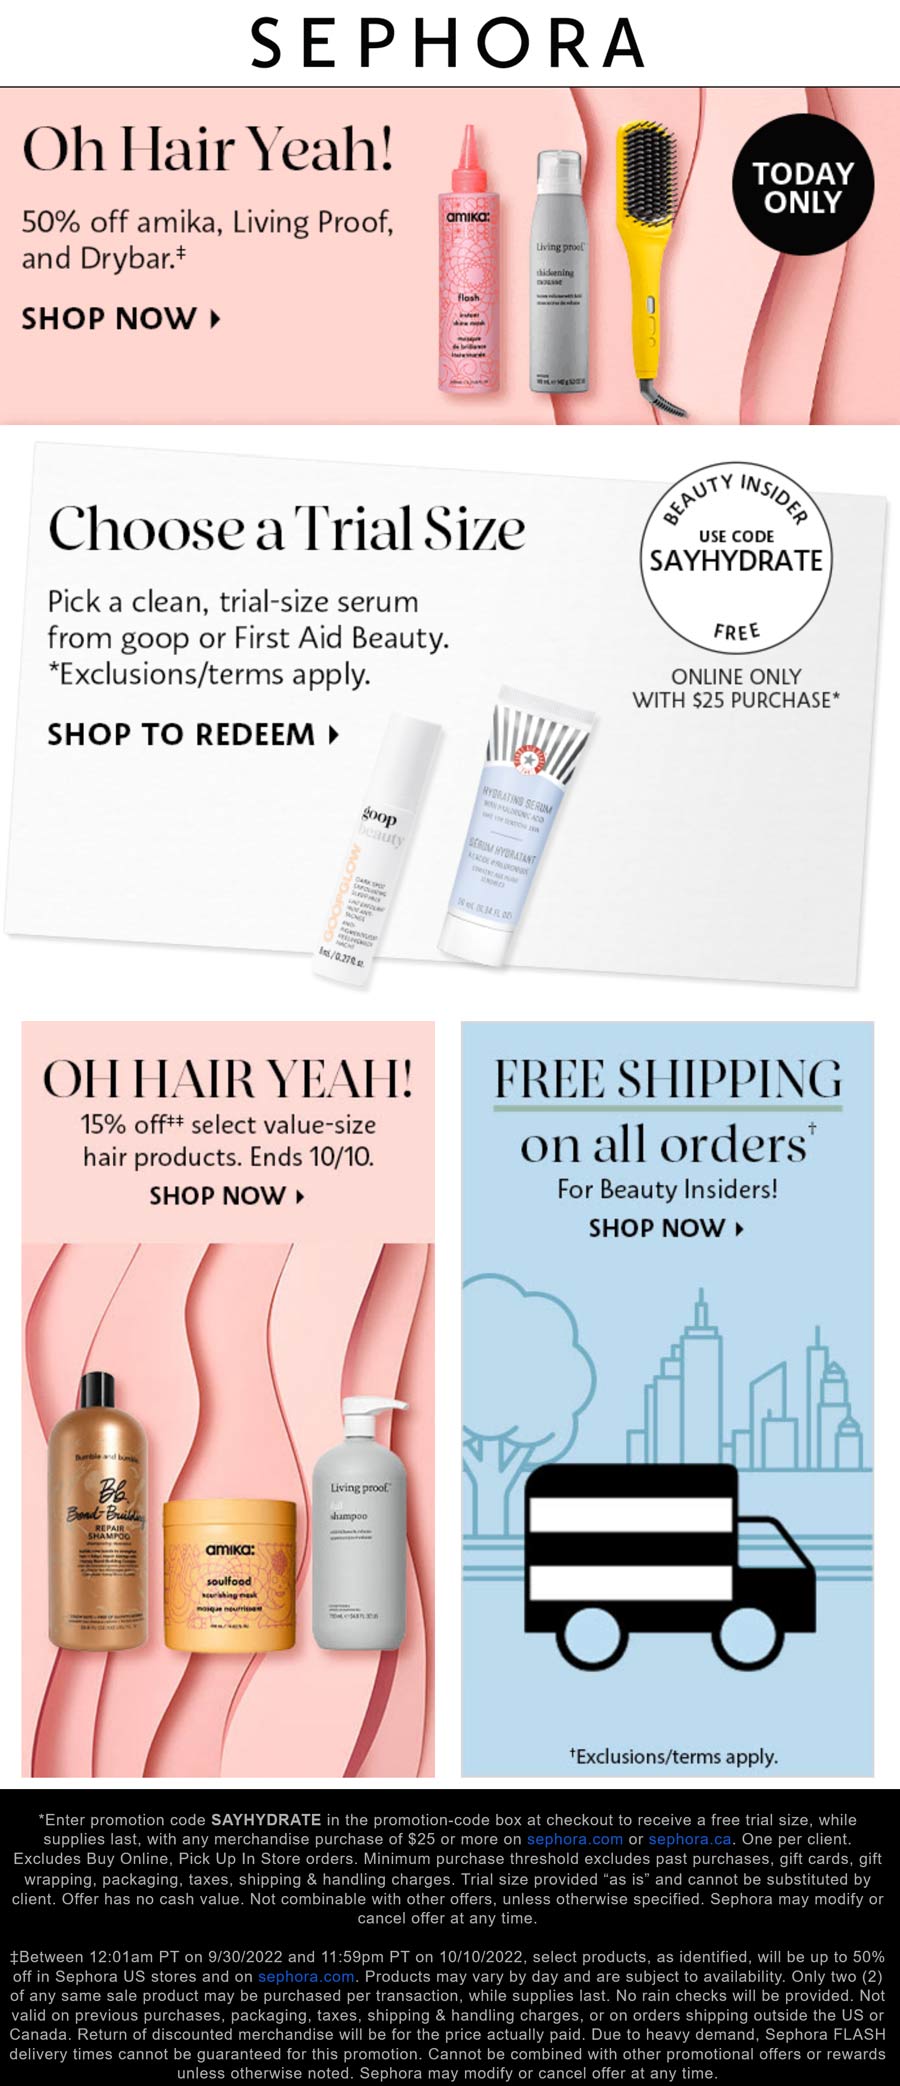 Sephora stores Coupon  50% off amika, Living Proof & Drybar today at Sephora, also free trial size via promo SAYHYDRATE #sephora 